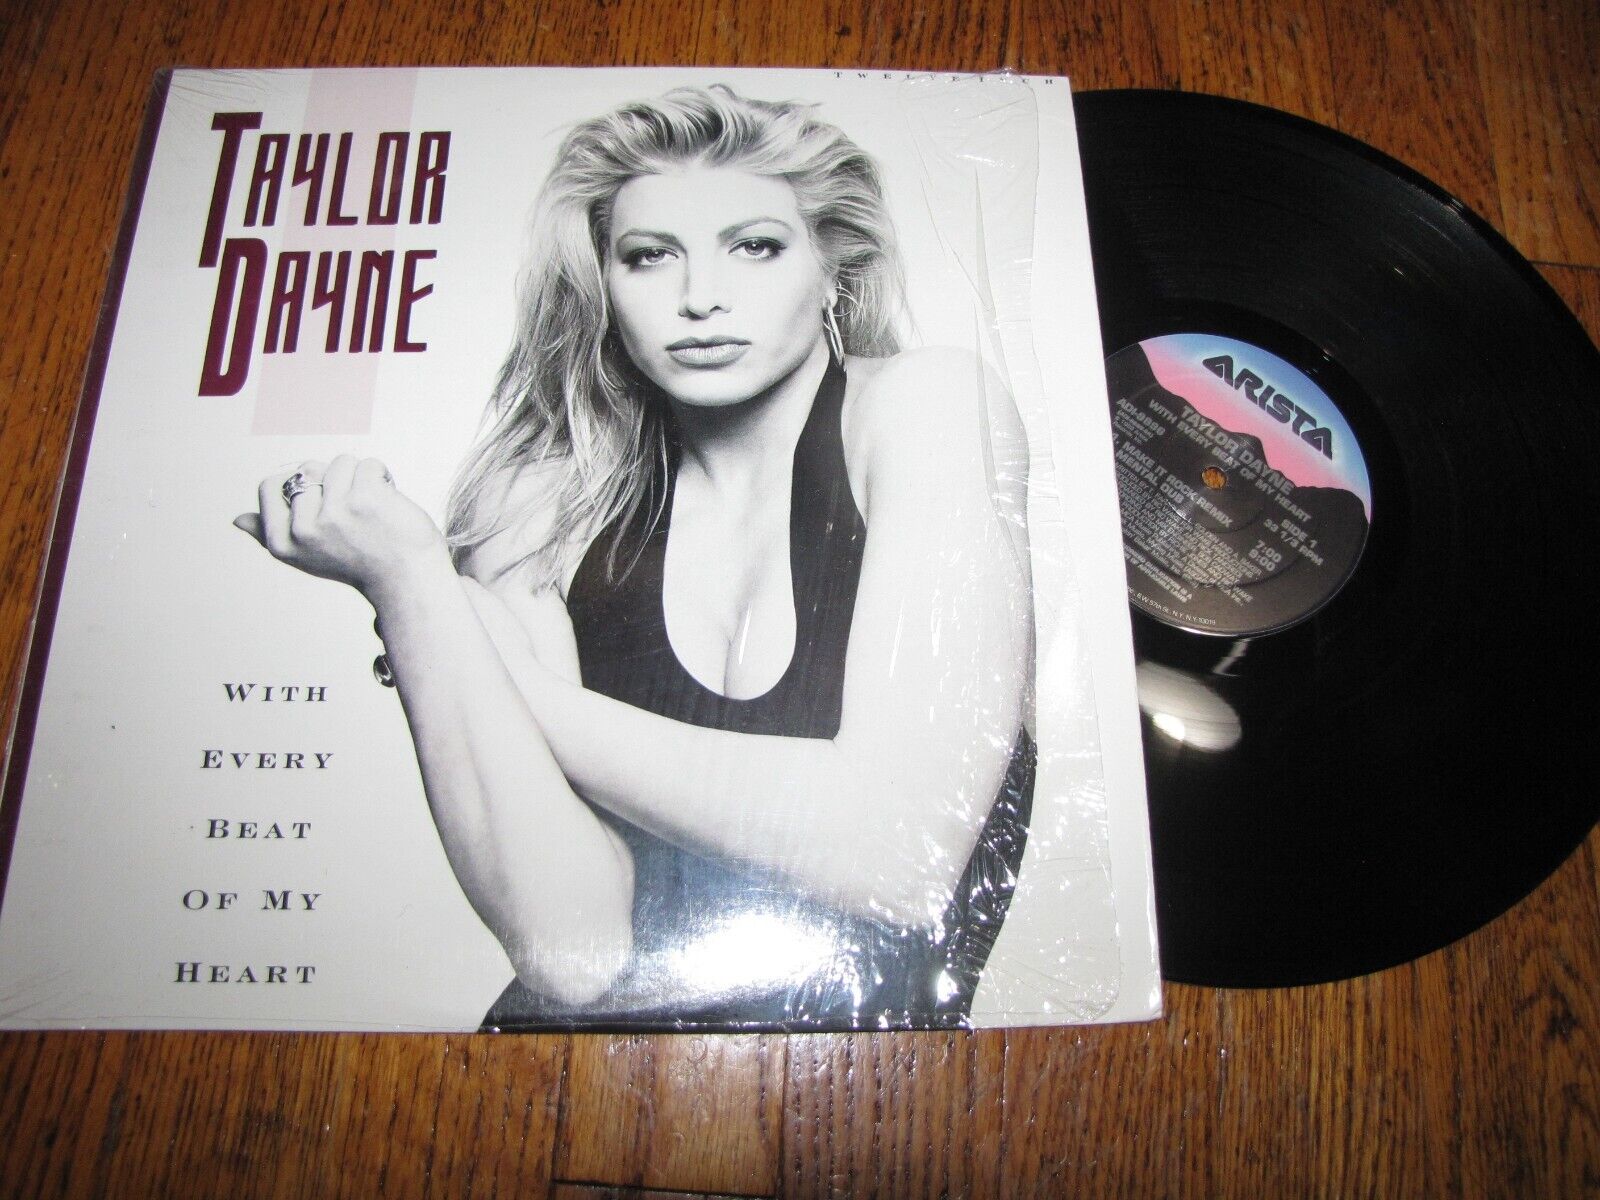 TAYLOR DAYNE - WITH EVERY BEAT OF MY HEART - ARISTA RECORDS 12" SINGLE